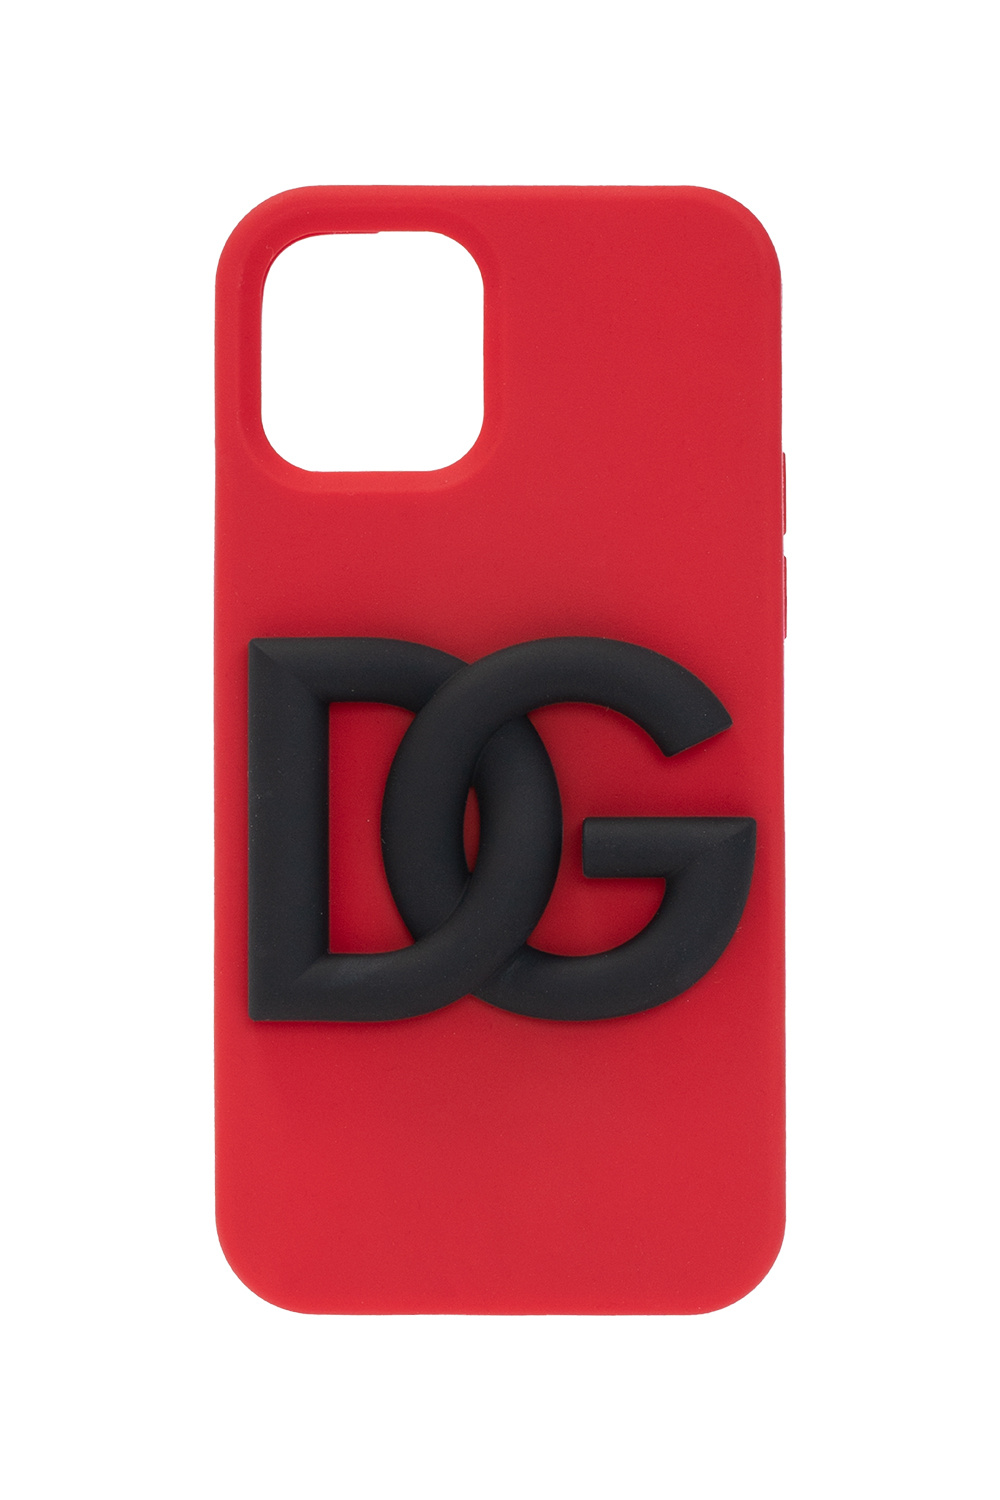 Dolce & Gabbana Logo Patch Iphone 14 Pro Case in Pink